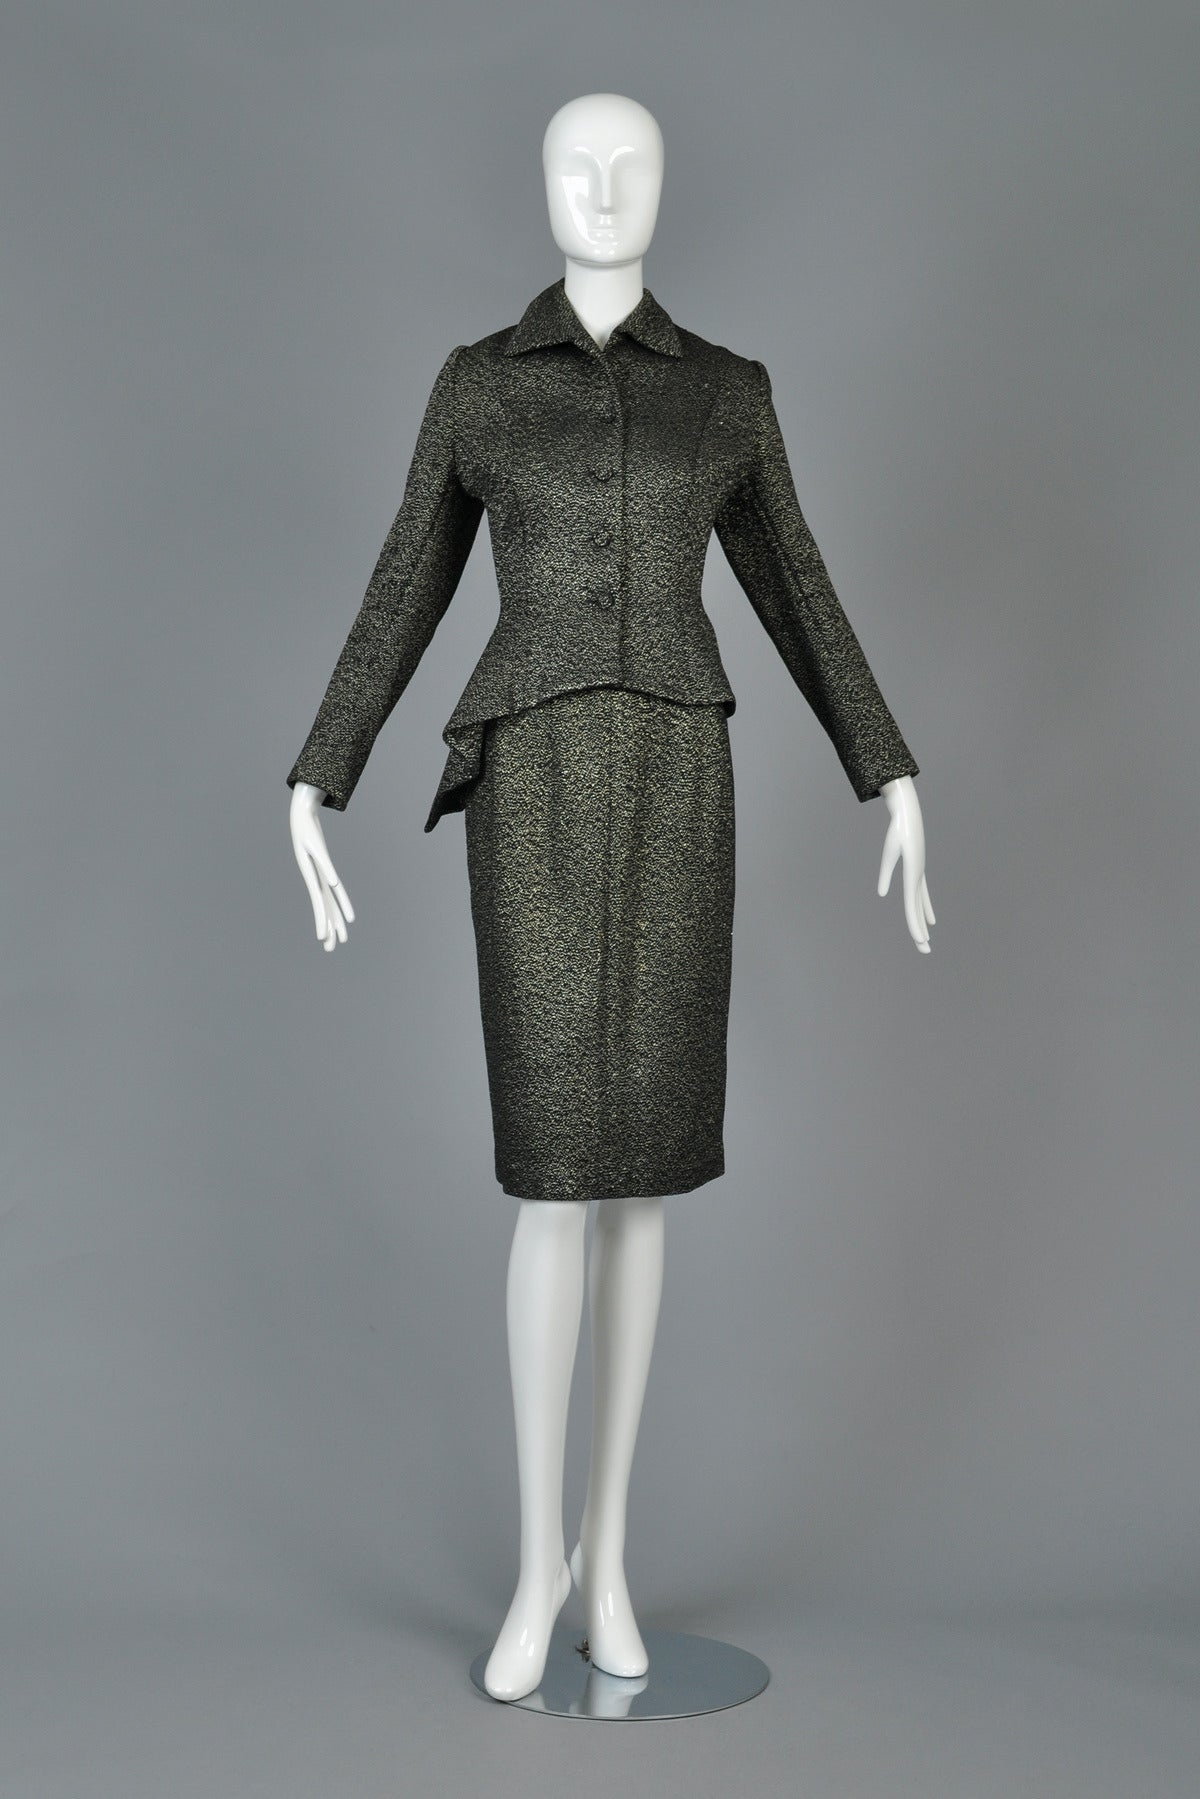 Incredible late 1940s/50s asymmetrical suit. Such a killer find! Classic construction with nipped waist + huge asymmetrical padded peplum. Black wool body with metallic lurex threads running throughout. Excellent vintage condition - missing the top